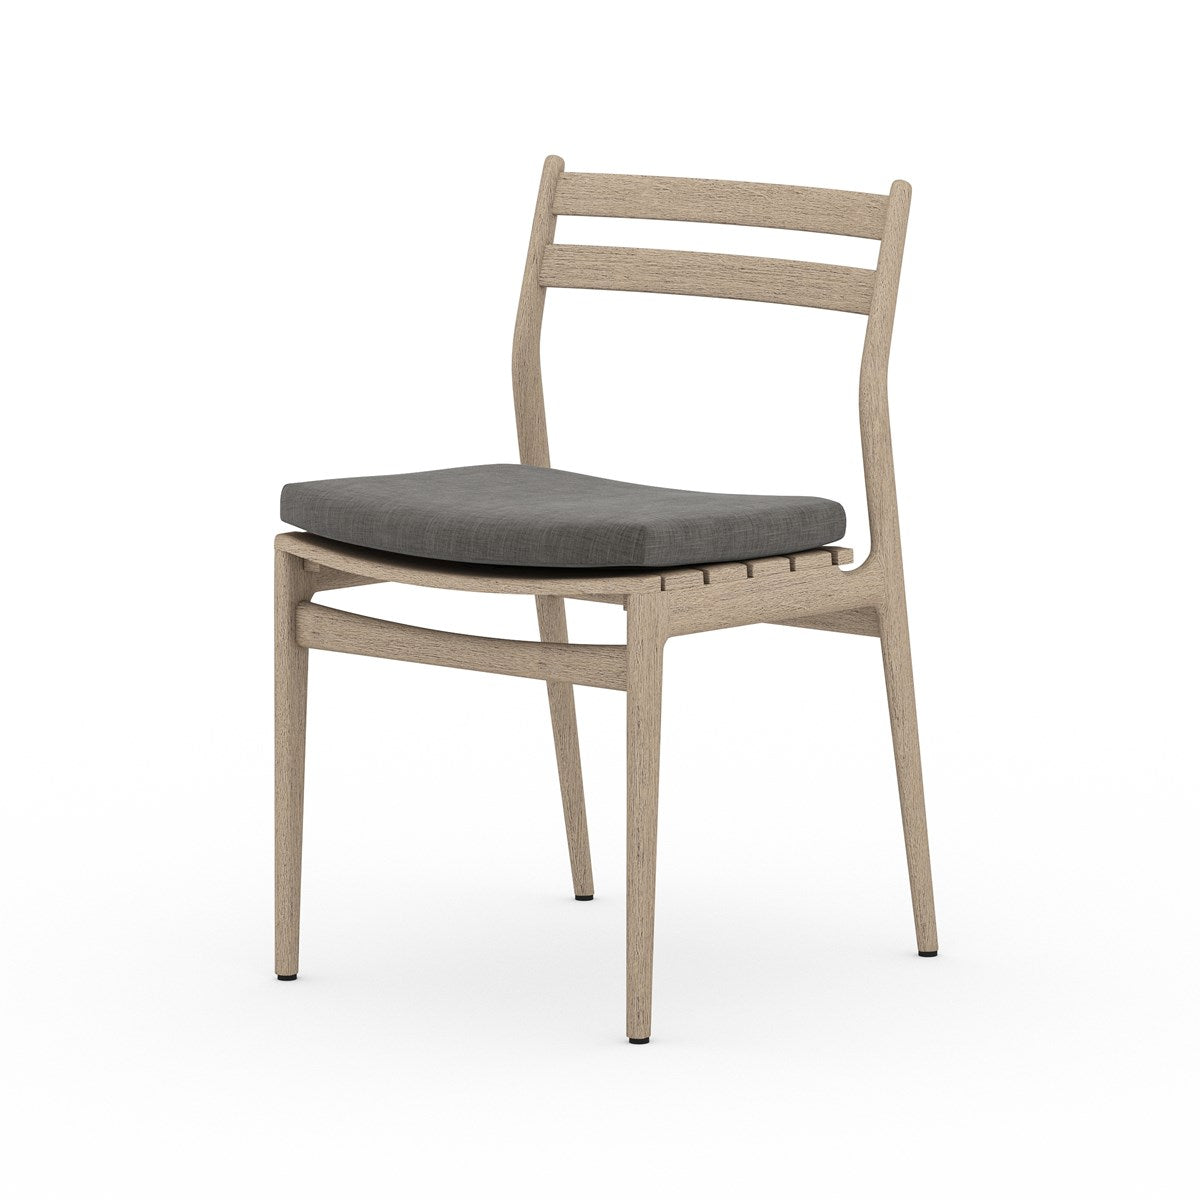 Atherton Outdoor Dining Chair Charcoal / Washed BrownDining Chair Four Hands  Charcoal Washed Brown  Four Hands, Burke Decor, Mid Century Modern Furniture, Old Bones Furniture Company, Old Bones Co, Modern Mid Century, Designer Furniture, https://www.oldbonesco.com/